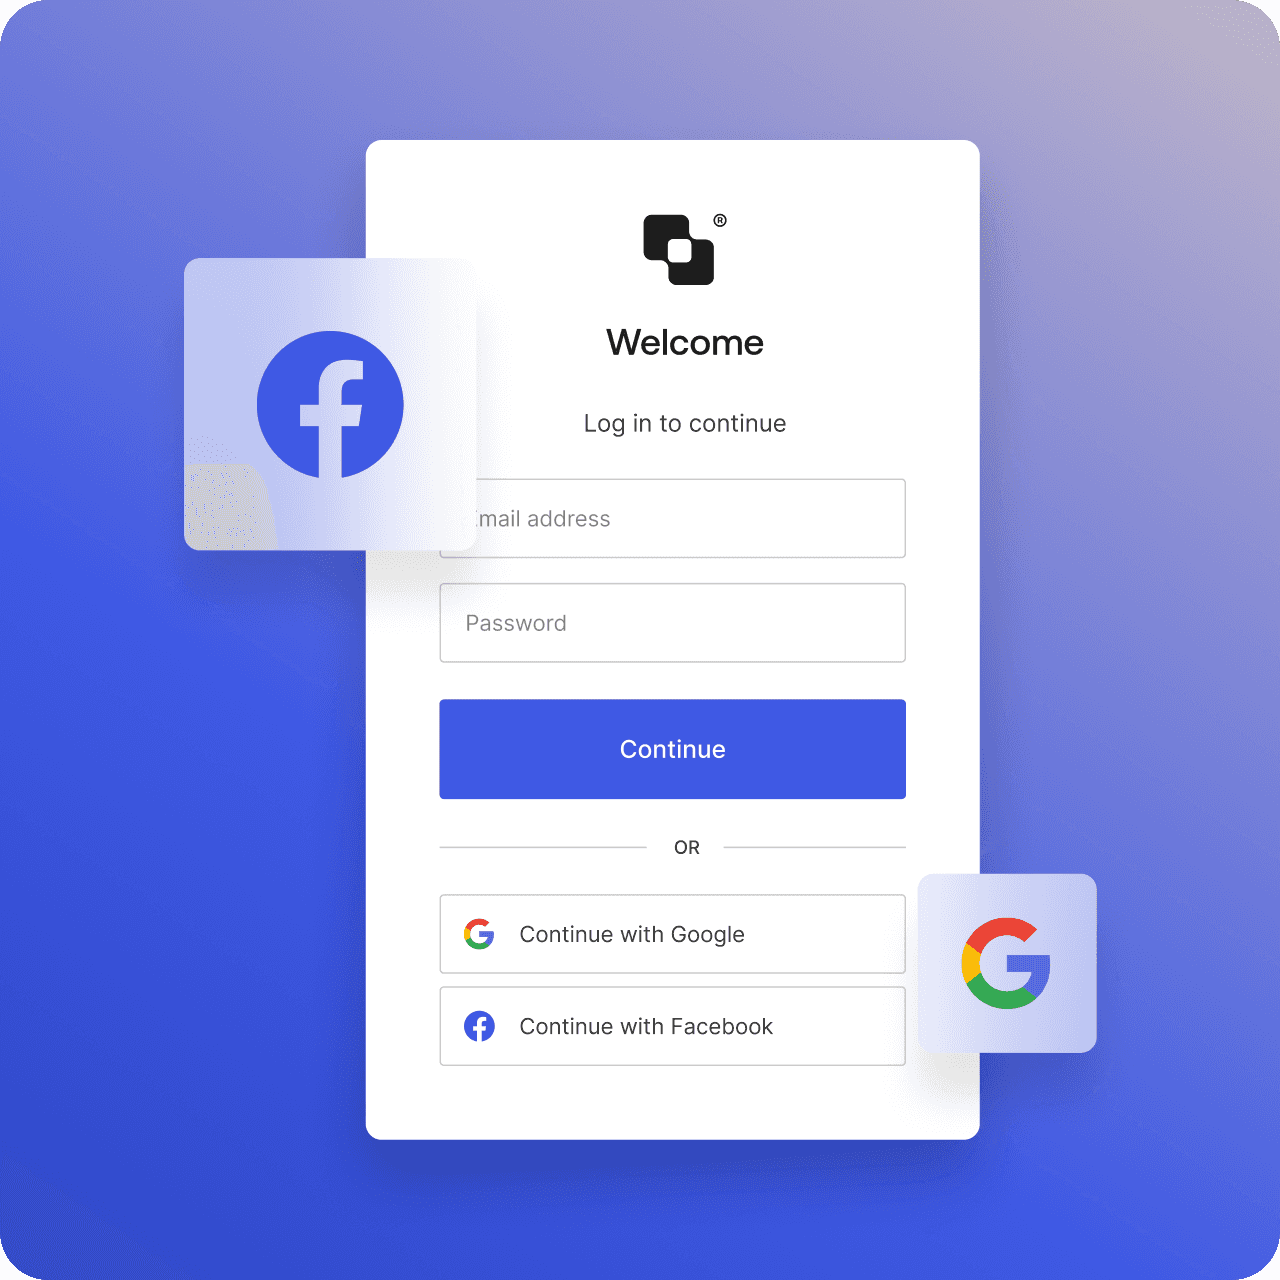 A login screen showing options to sign in with Facebook or Google